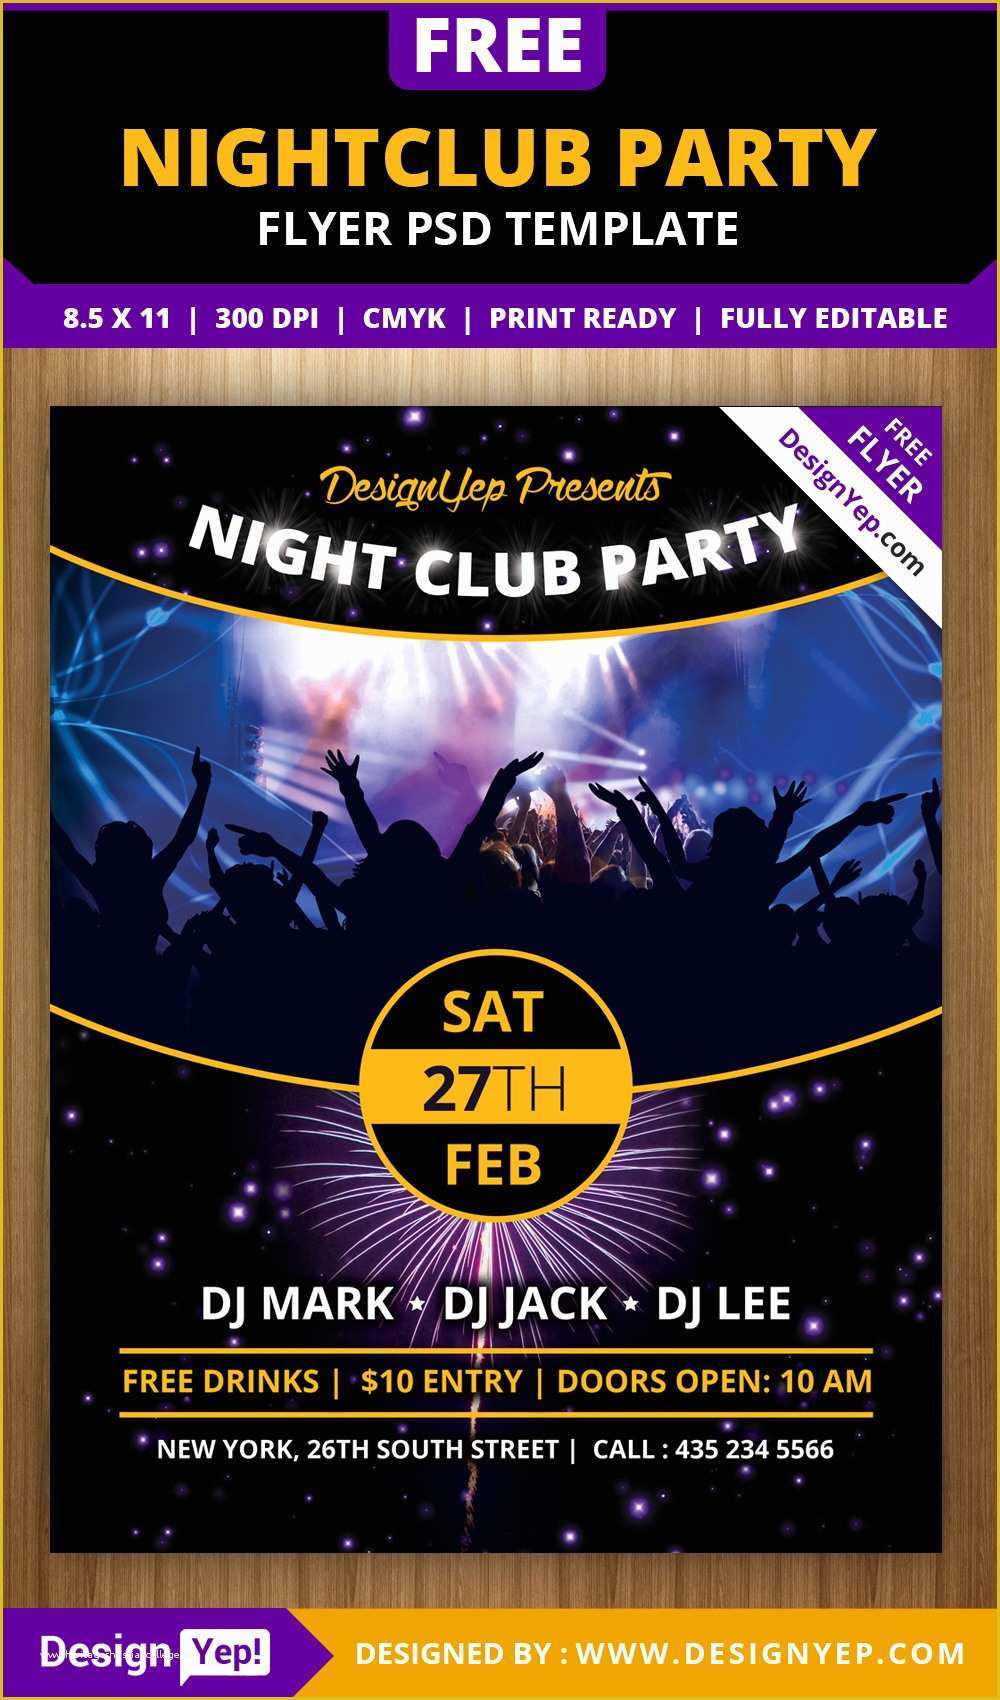 Event Poster Templates Free Of Free Nightclub Party Flyer Psd Template Designyep